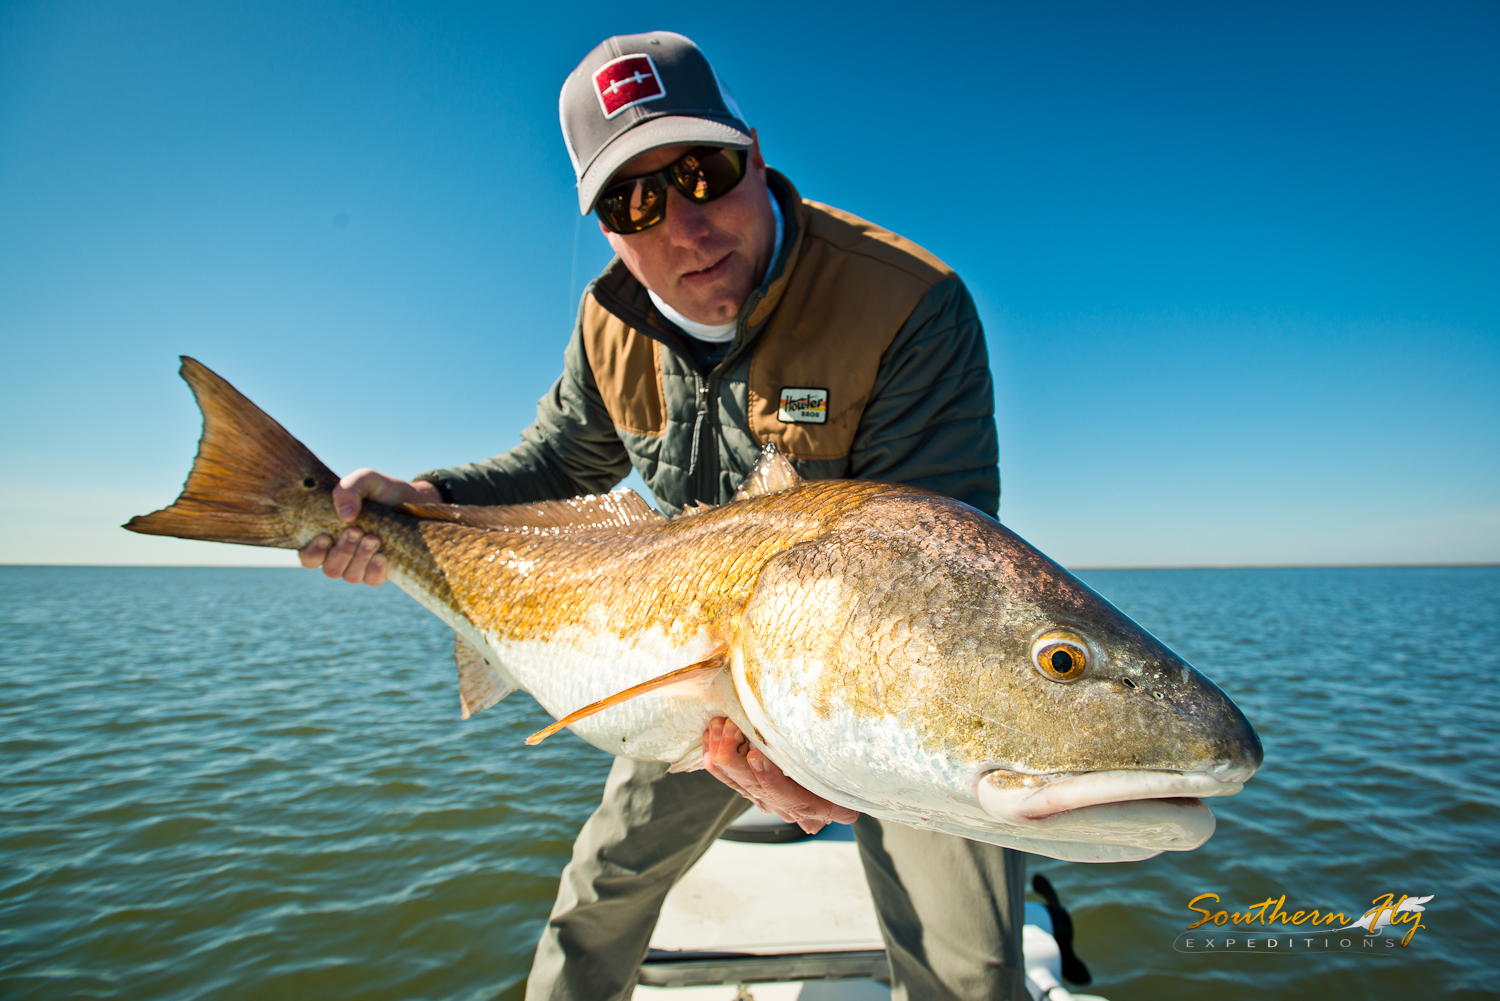 unique fathers day gifts - fly fishing new orleans Southern Fly Expeditions